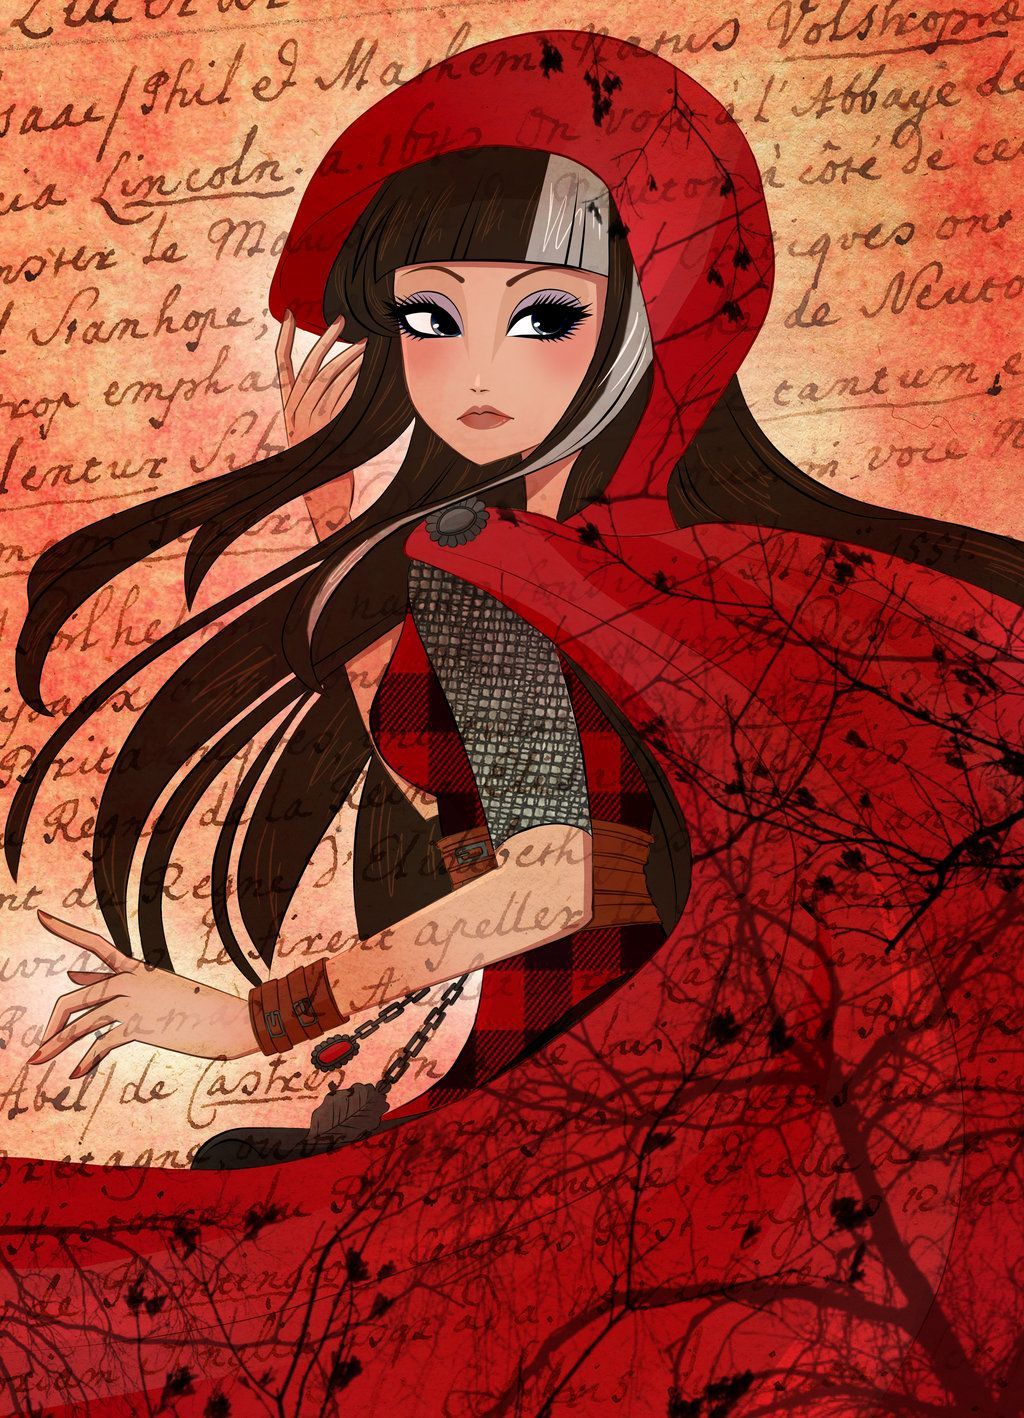 Behind you. Ever after high, Hood wallpaper, Little red riding hood